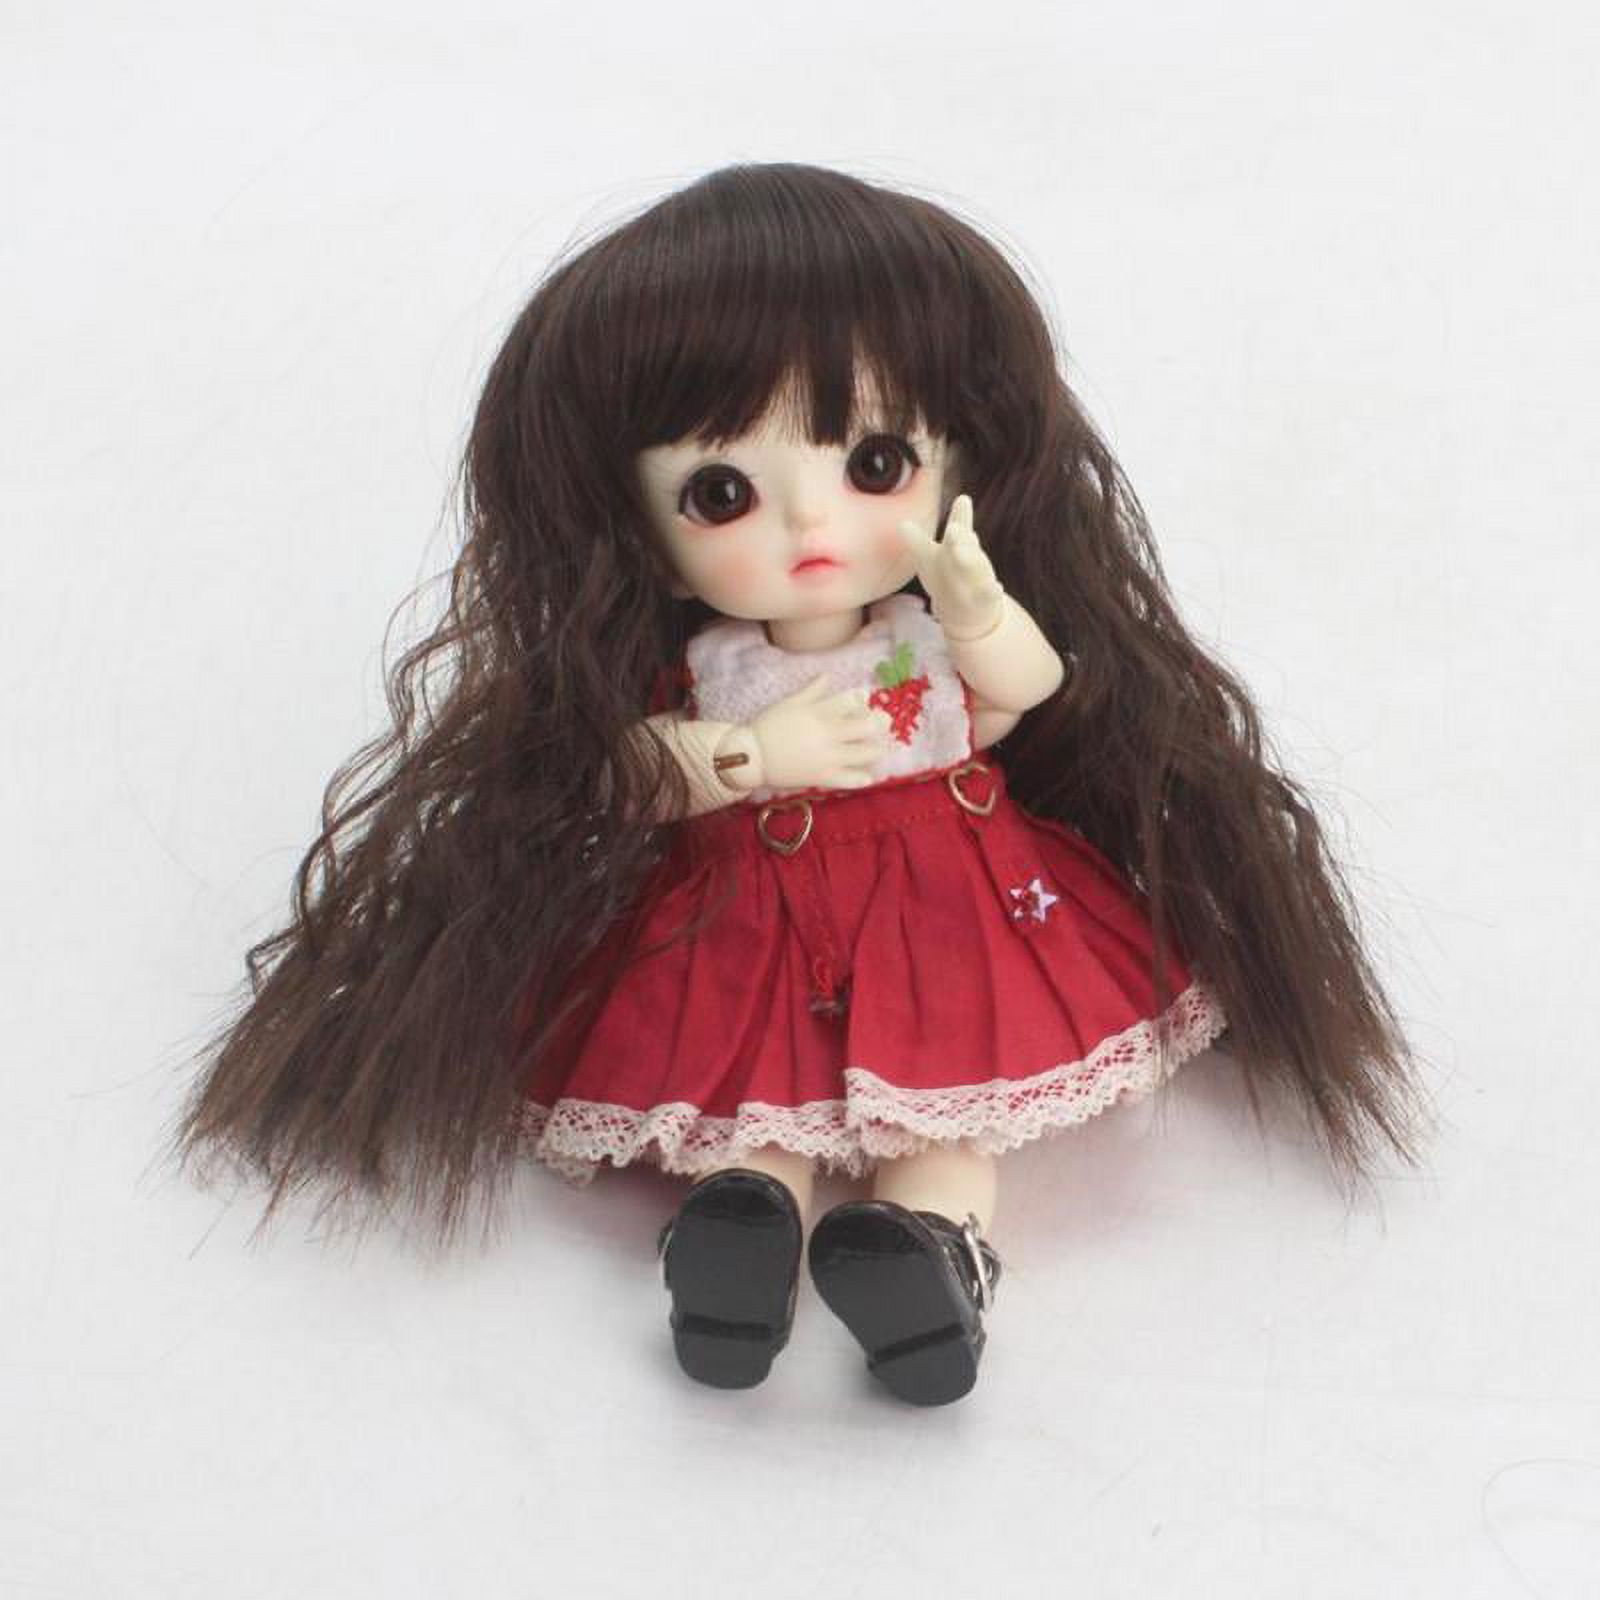 Wigs Only 5-6inch 13-15CM BJD Doll Wigs 1/8 Dark Brown Synthetic Mohair  Curly Hair with Bangs for Dollfie Hairstyle Making 